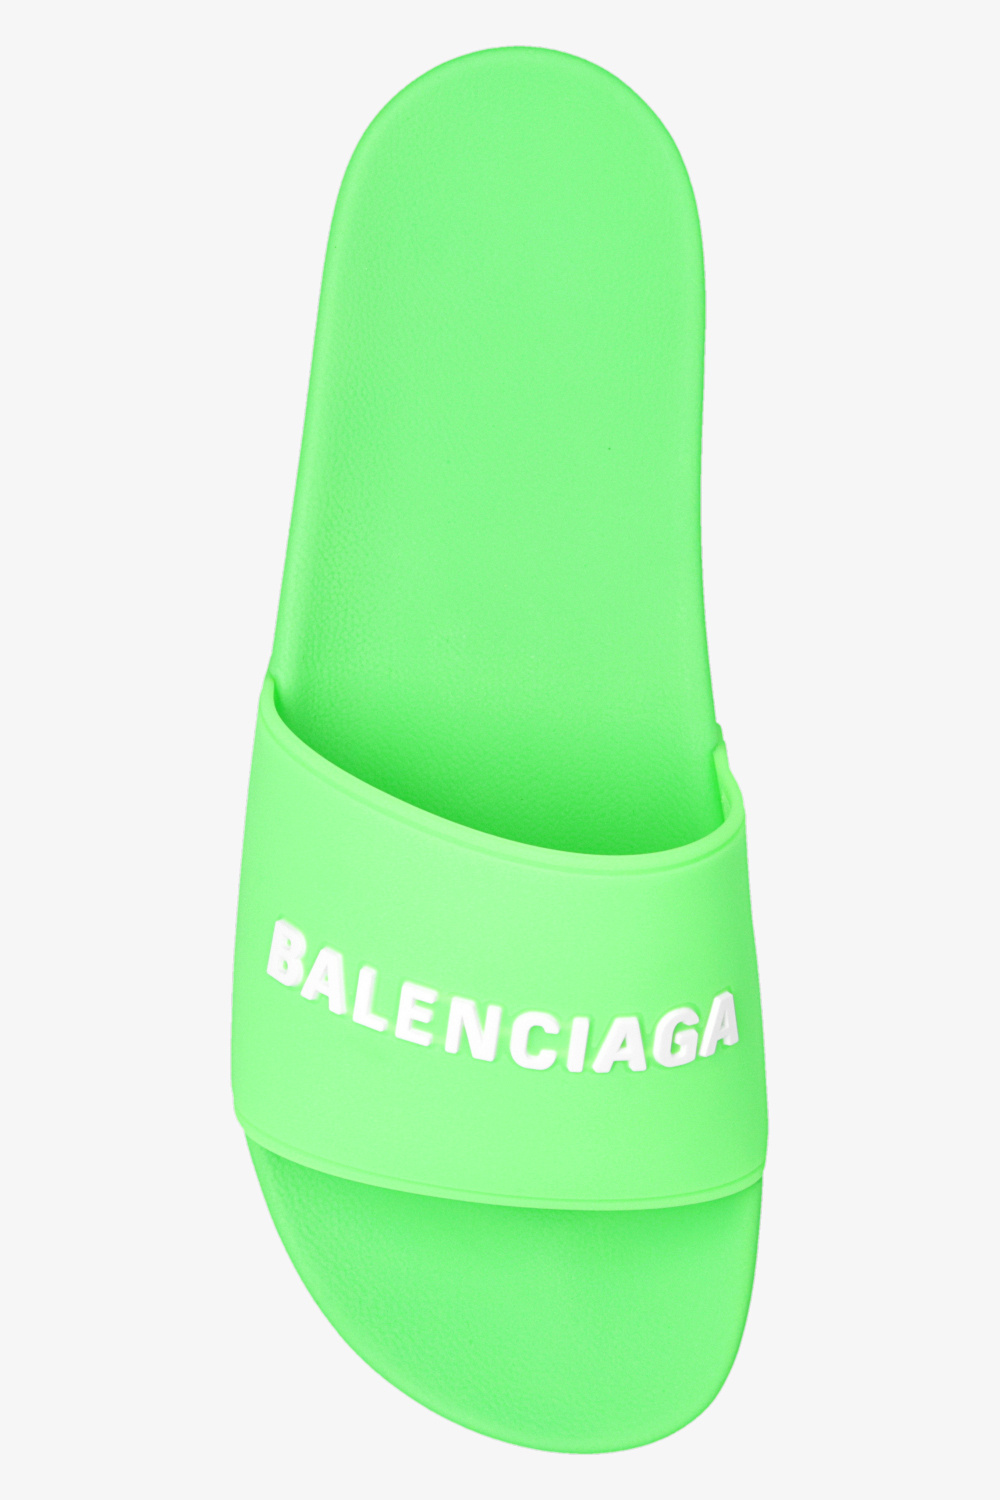 Balenciaga A basketball shoe that bites both outdoor and indoor court surfaces well is what you prefer